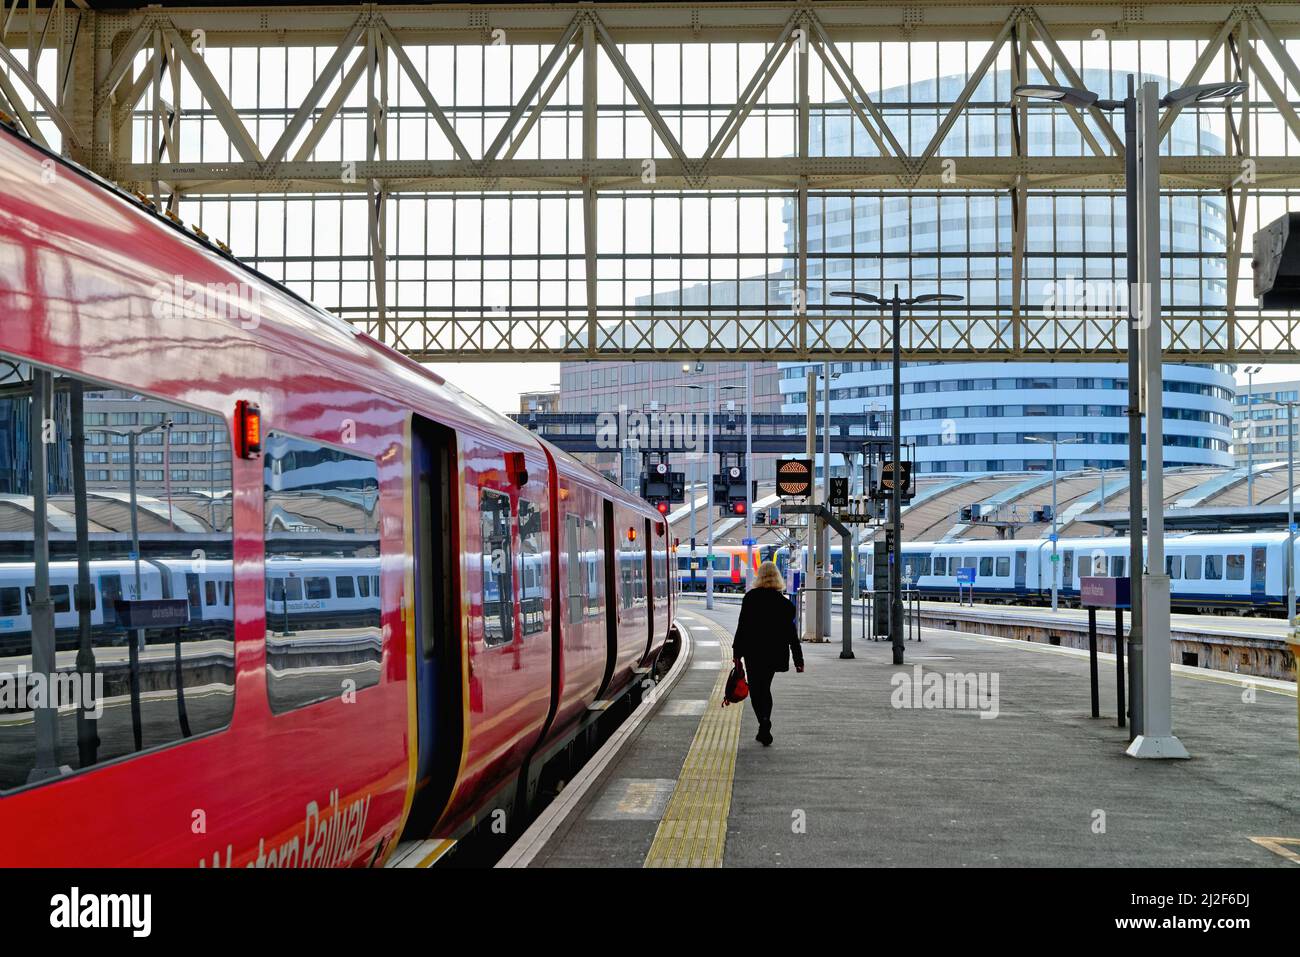 A lone passenger about to board a South Western Railway commuter train at Waterloo Station, London England UK Stock Photo